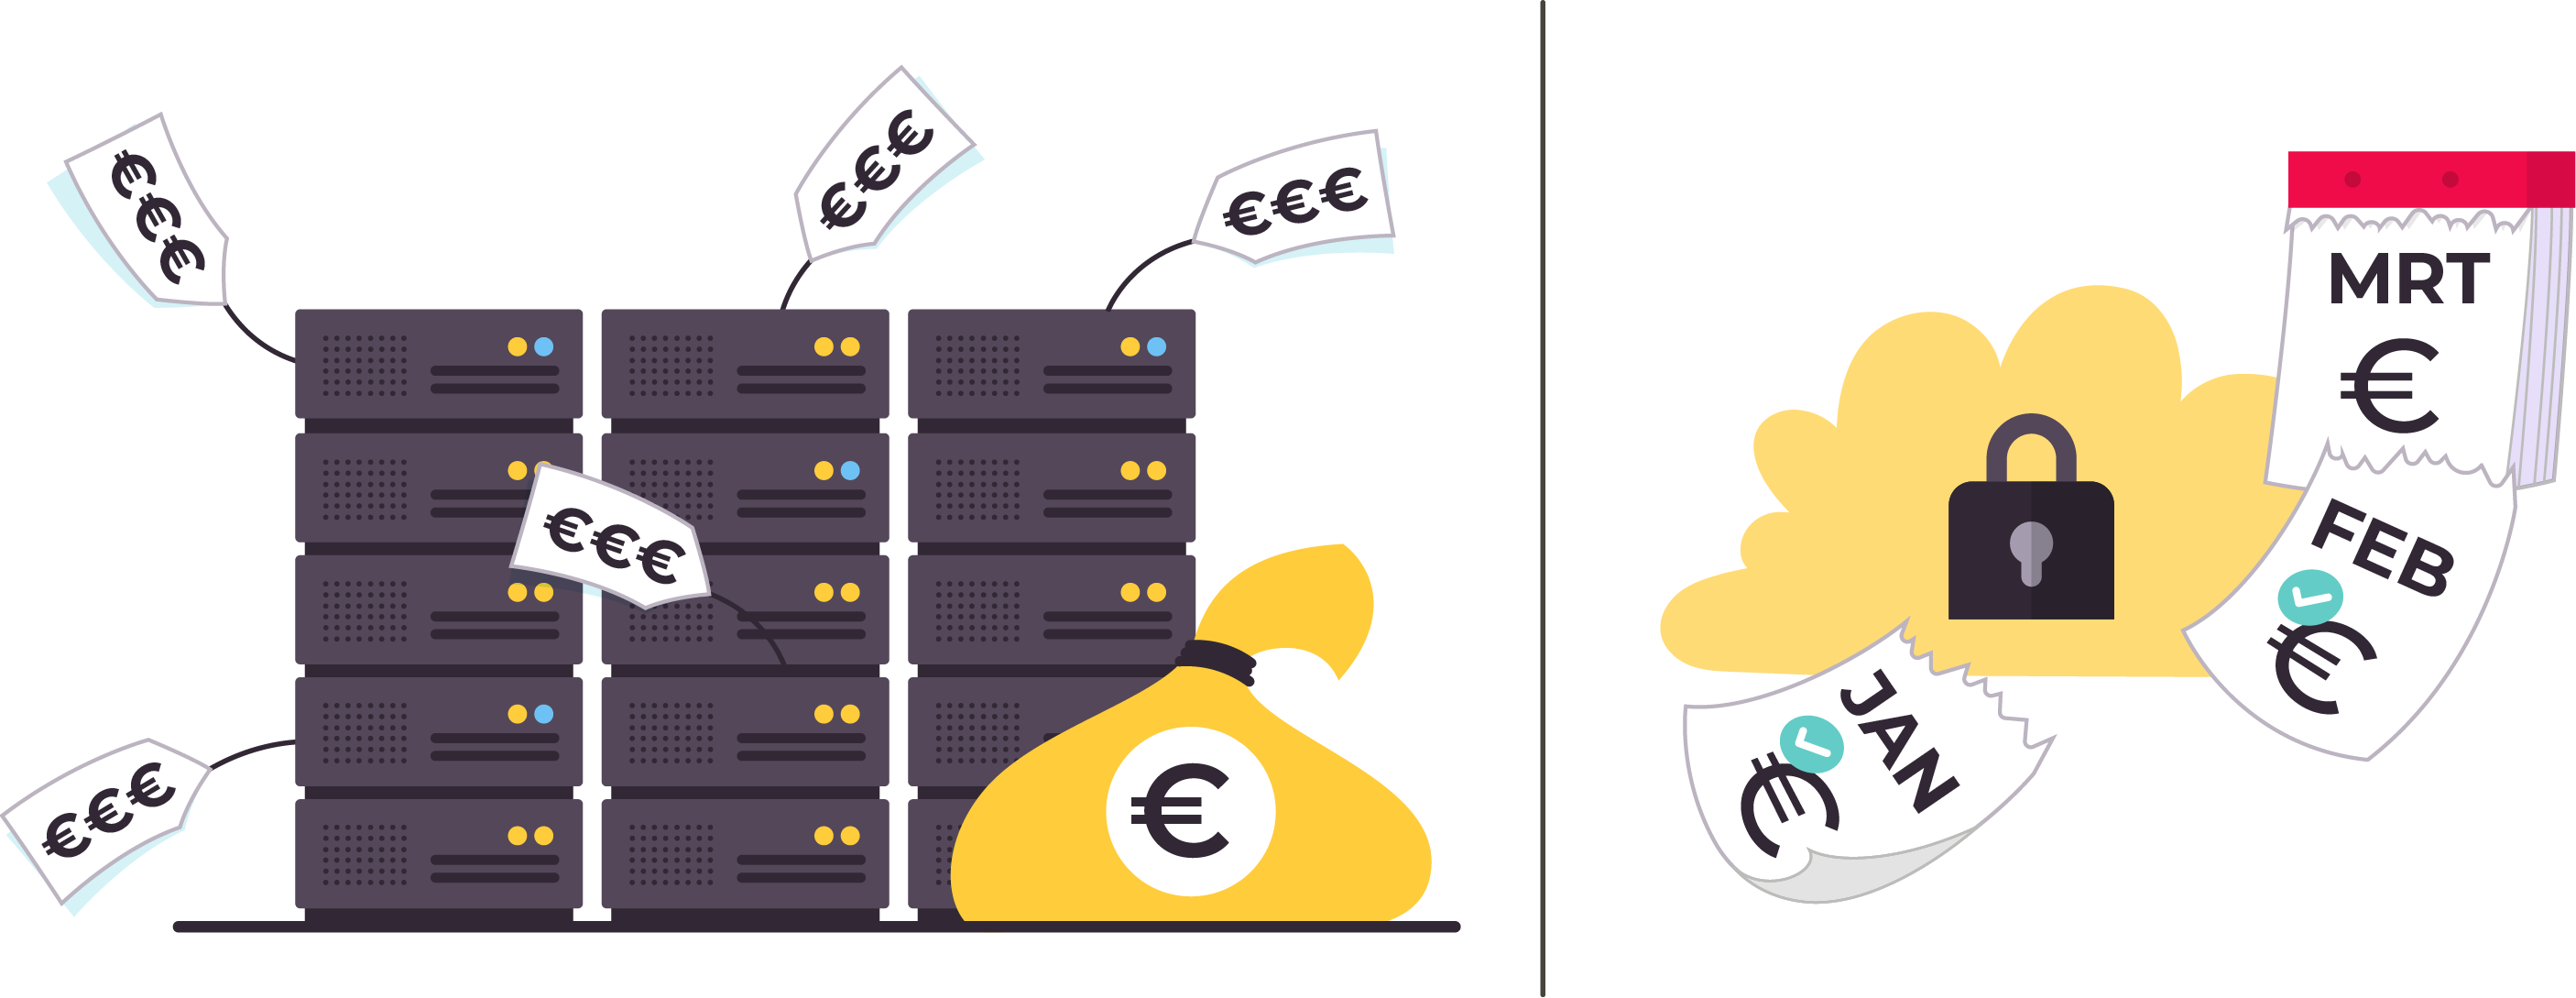 EasySystems Illustraties_v2.0_4 To cloud or not to cloud-30